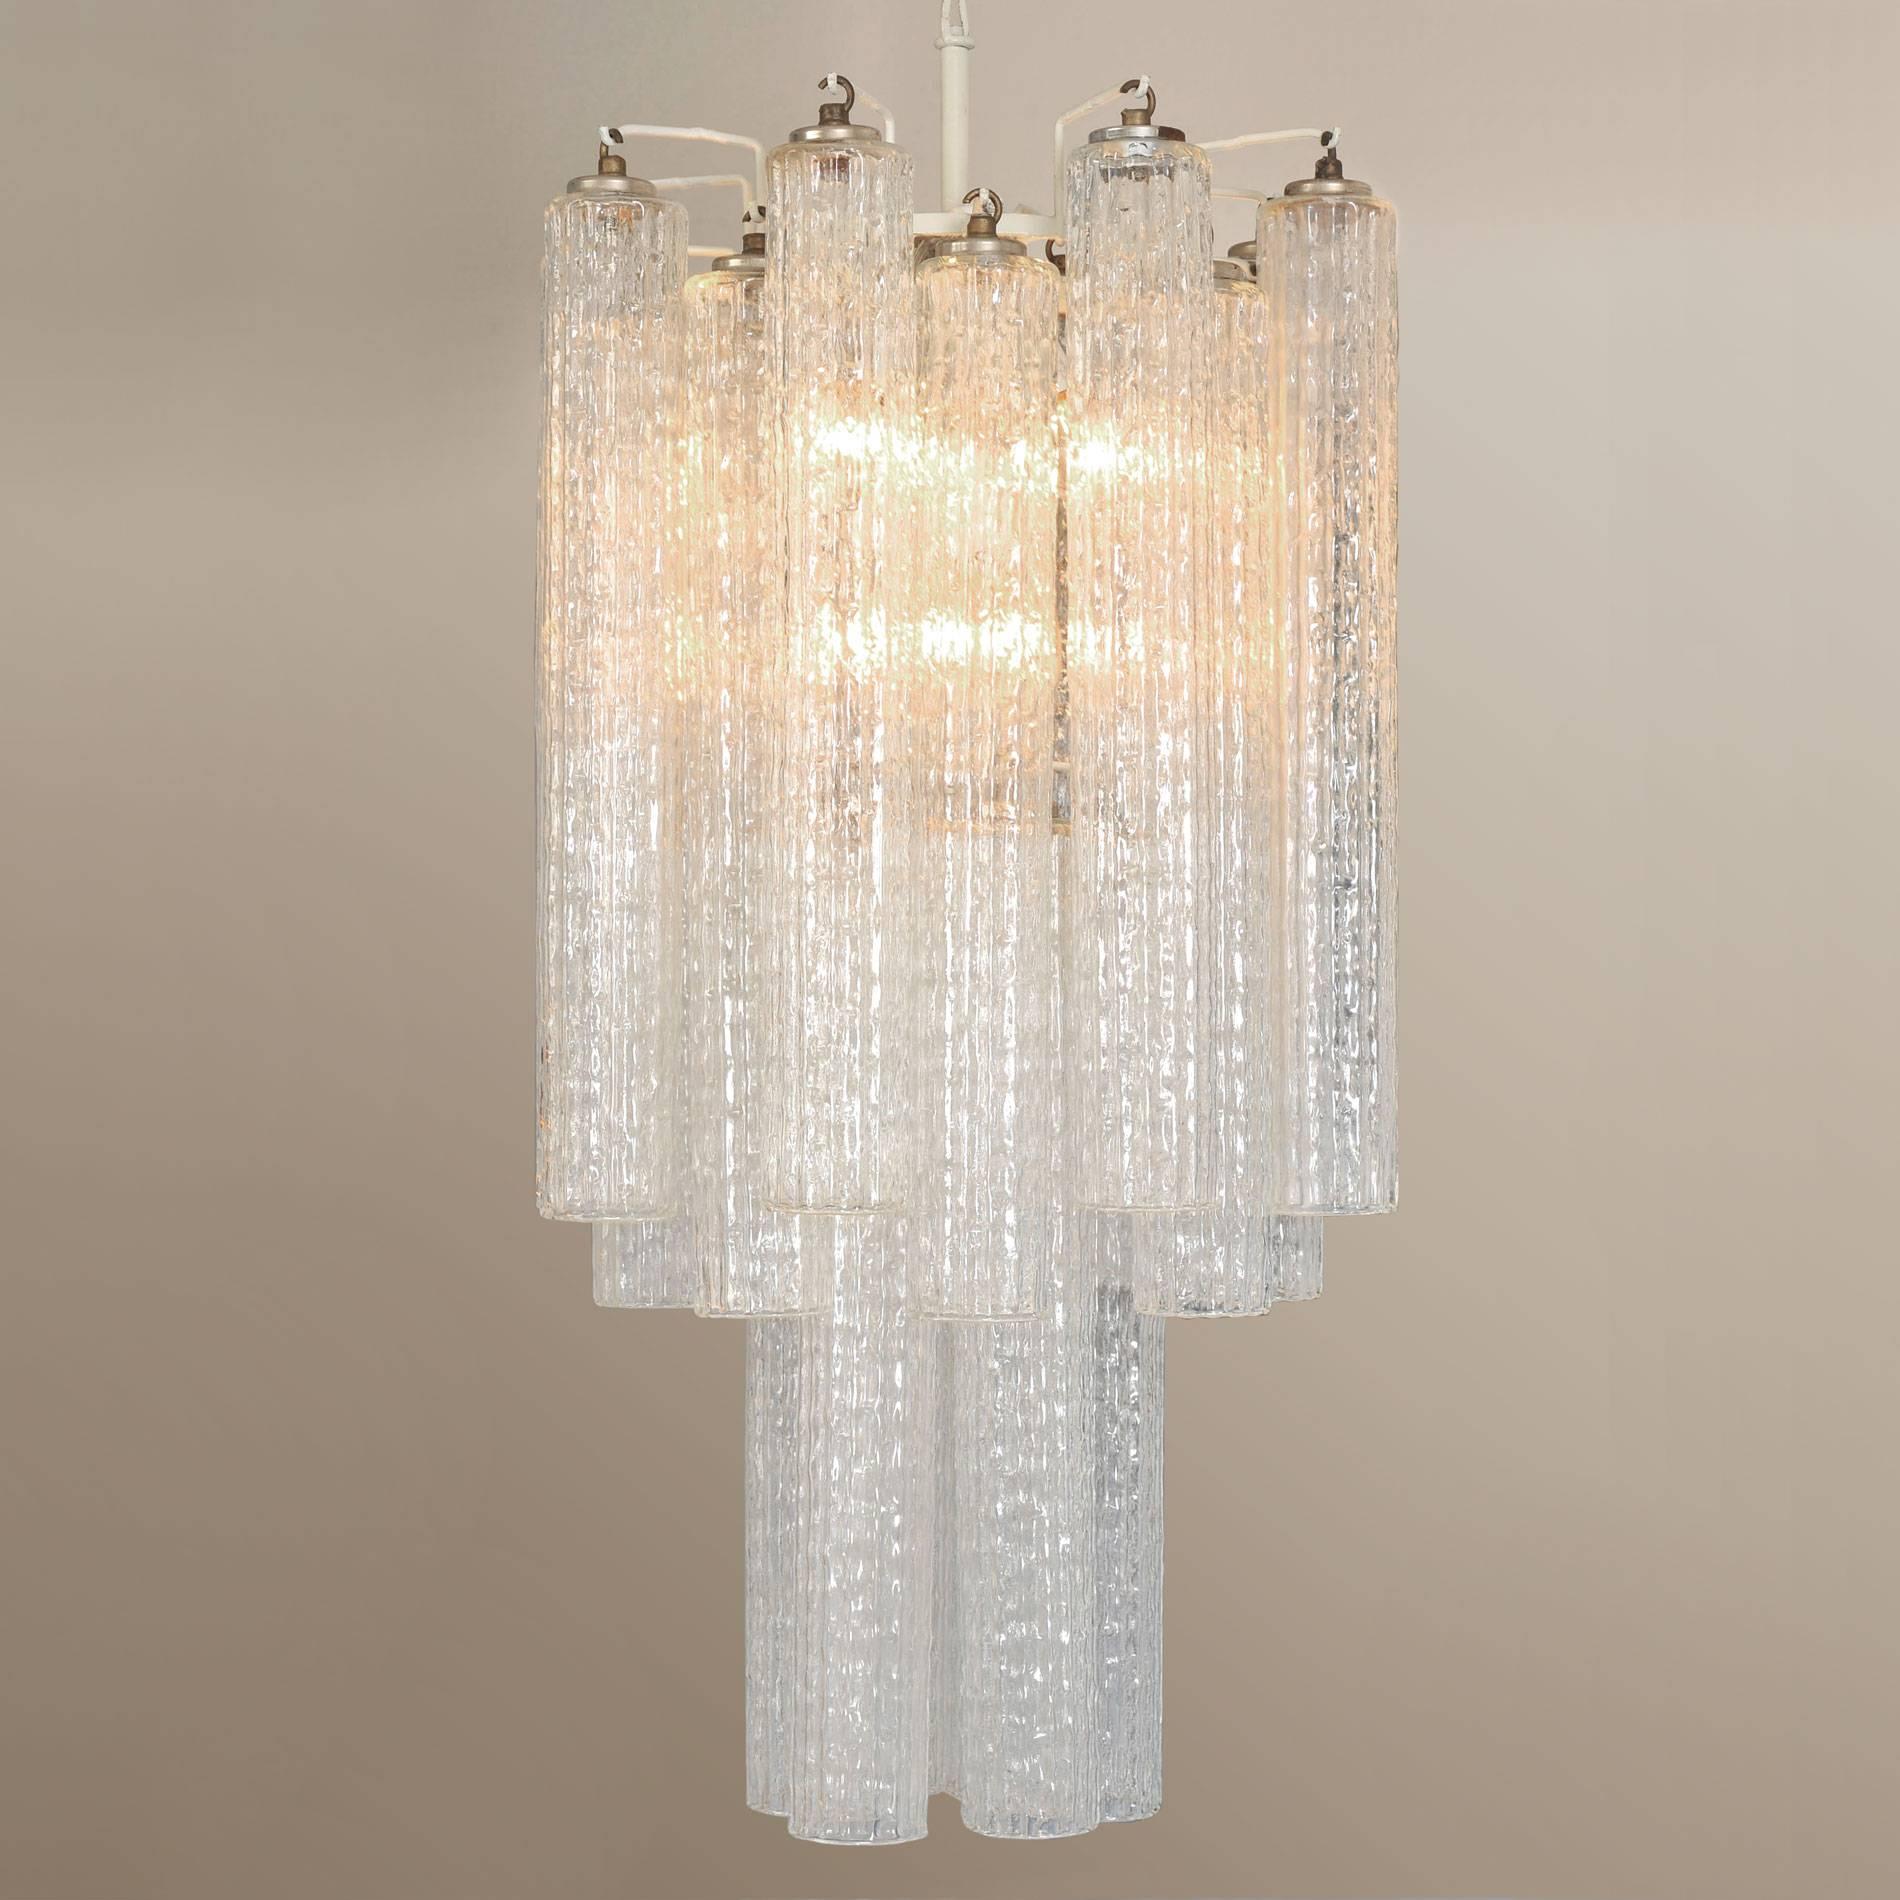 Superb Murano glass chandelier in two tiers of unusually long textured cylindrical drops.
    